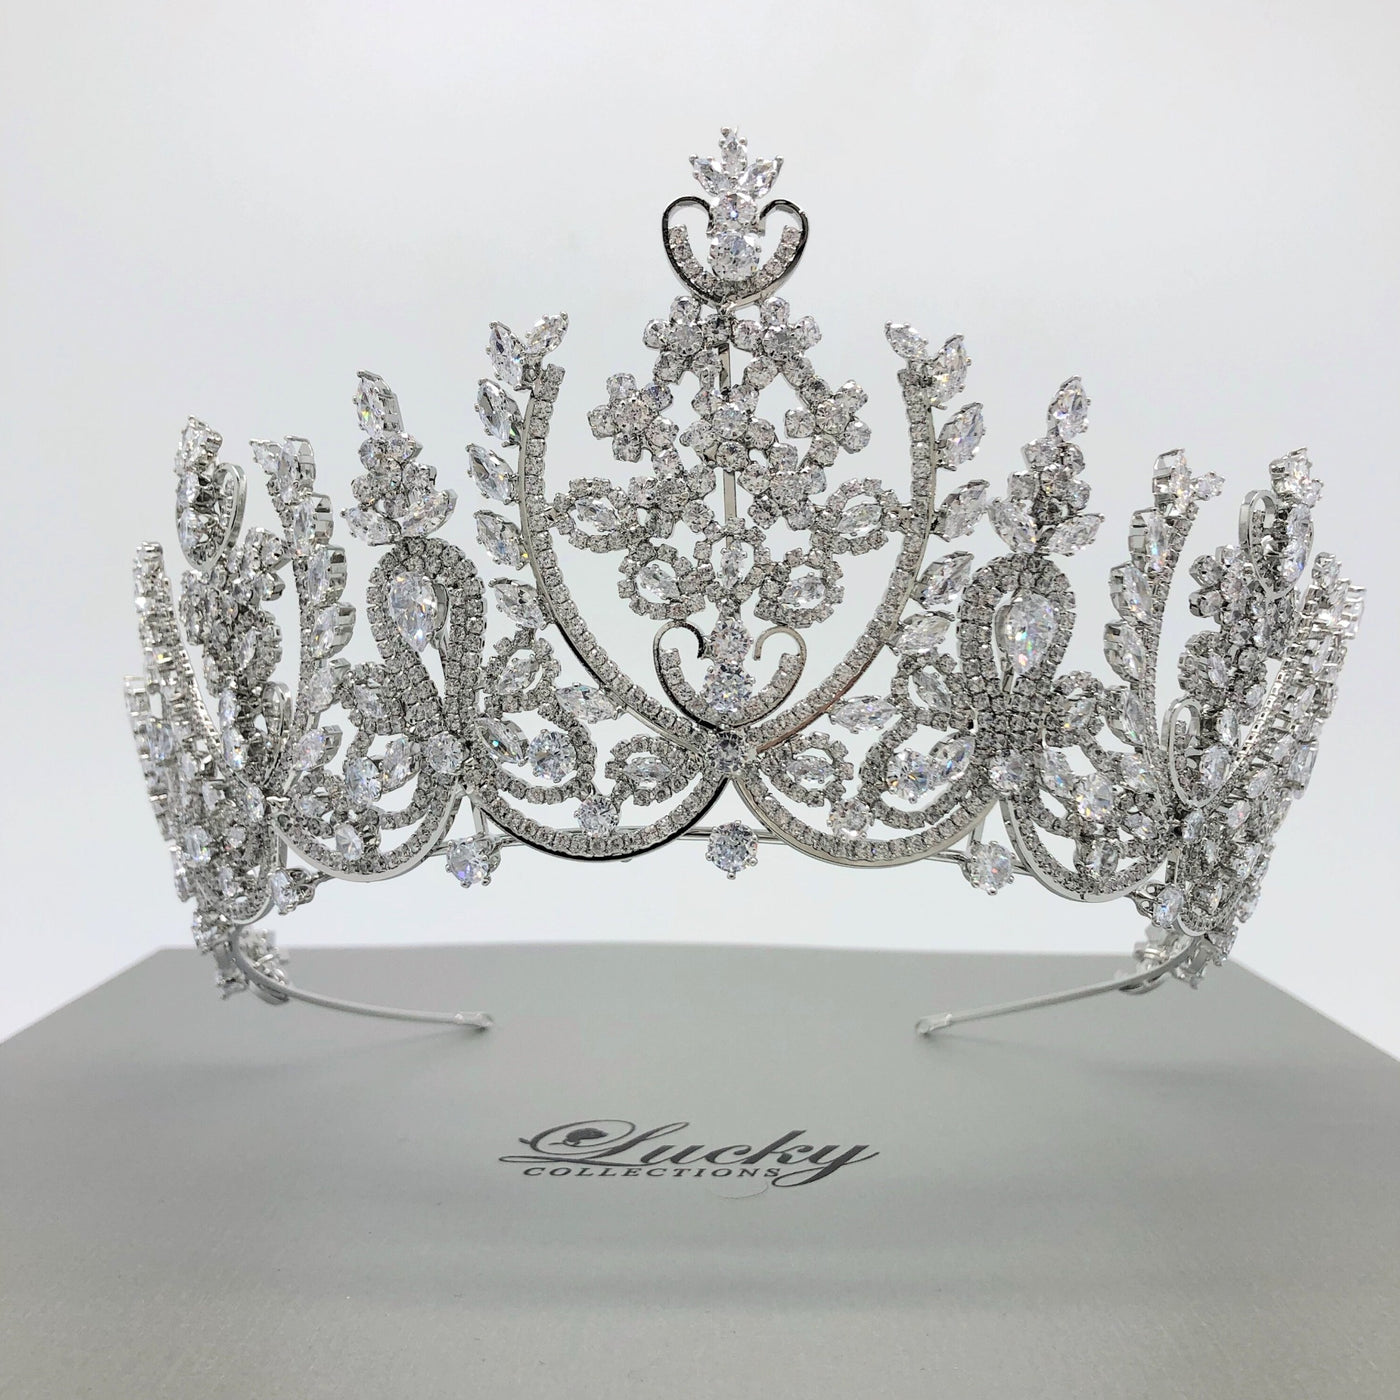 Silver Tall Tiara with unique Curves , Lines, Motifs & Style by Headband & Hair Accessories for Brides, Quince, Maid of Honor by Lucky Collections ™